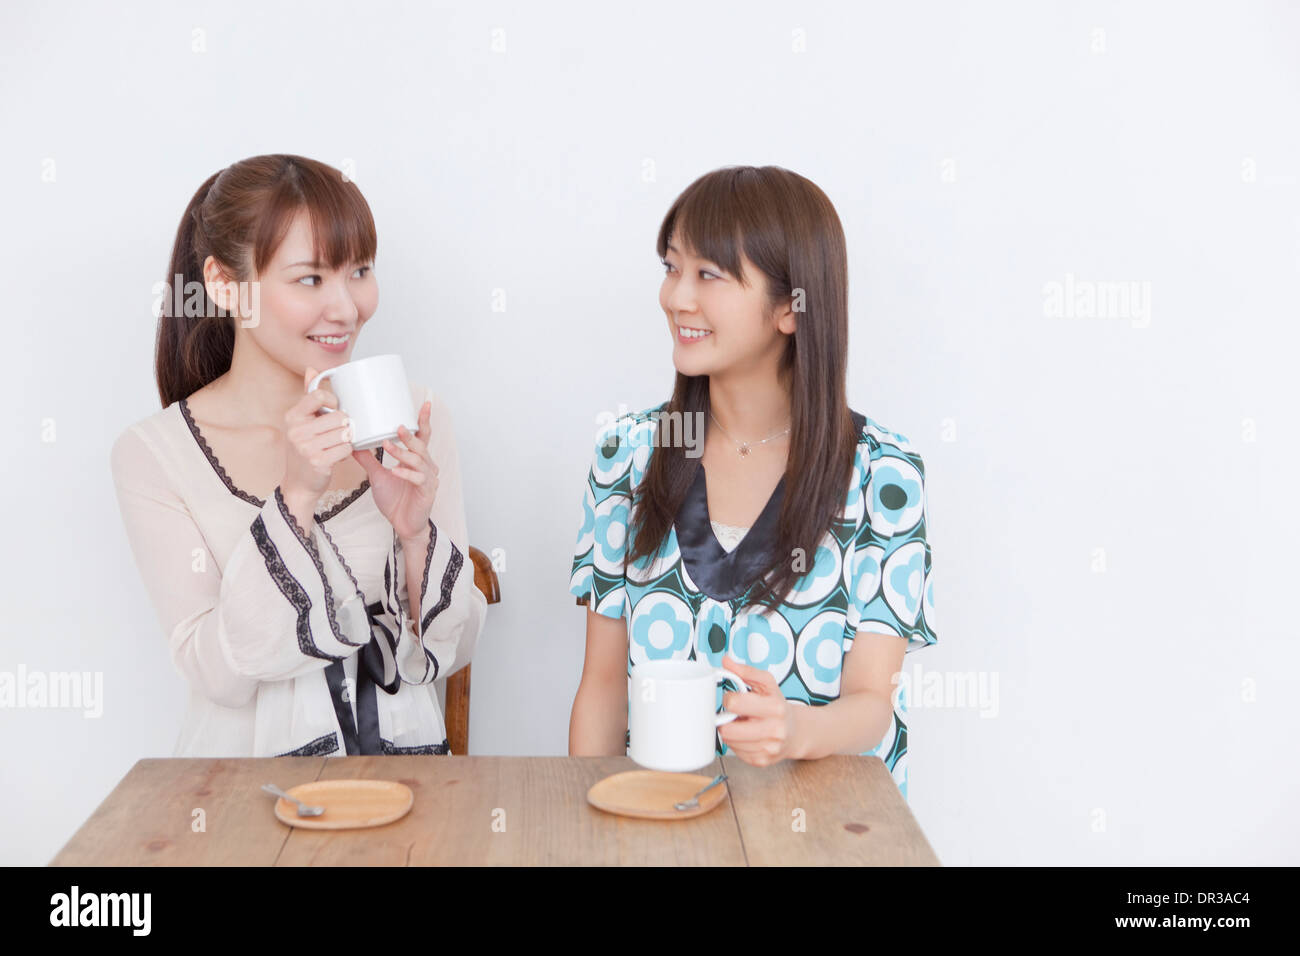 Two young women having hot drink Stock Photo